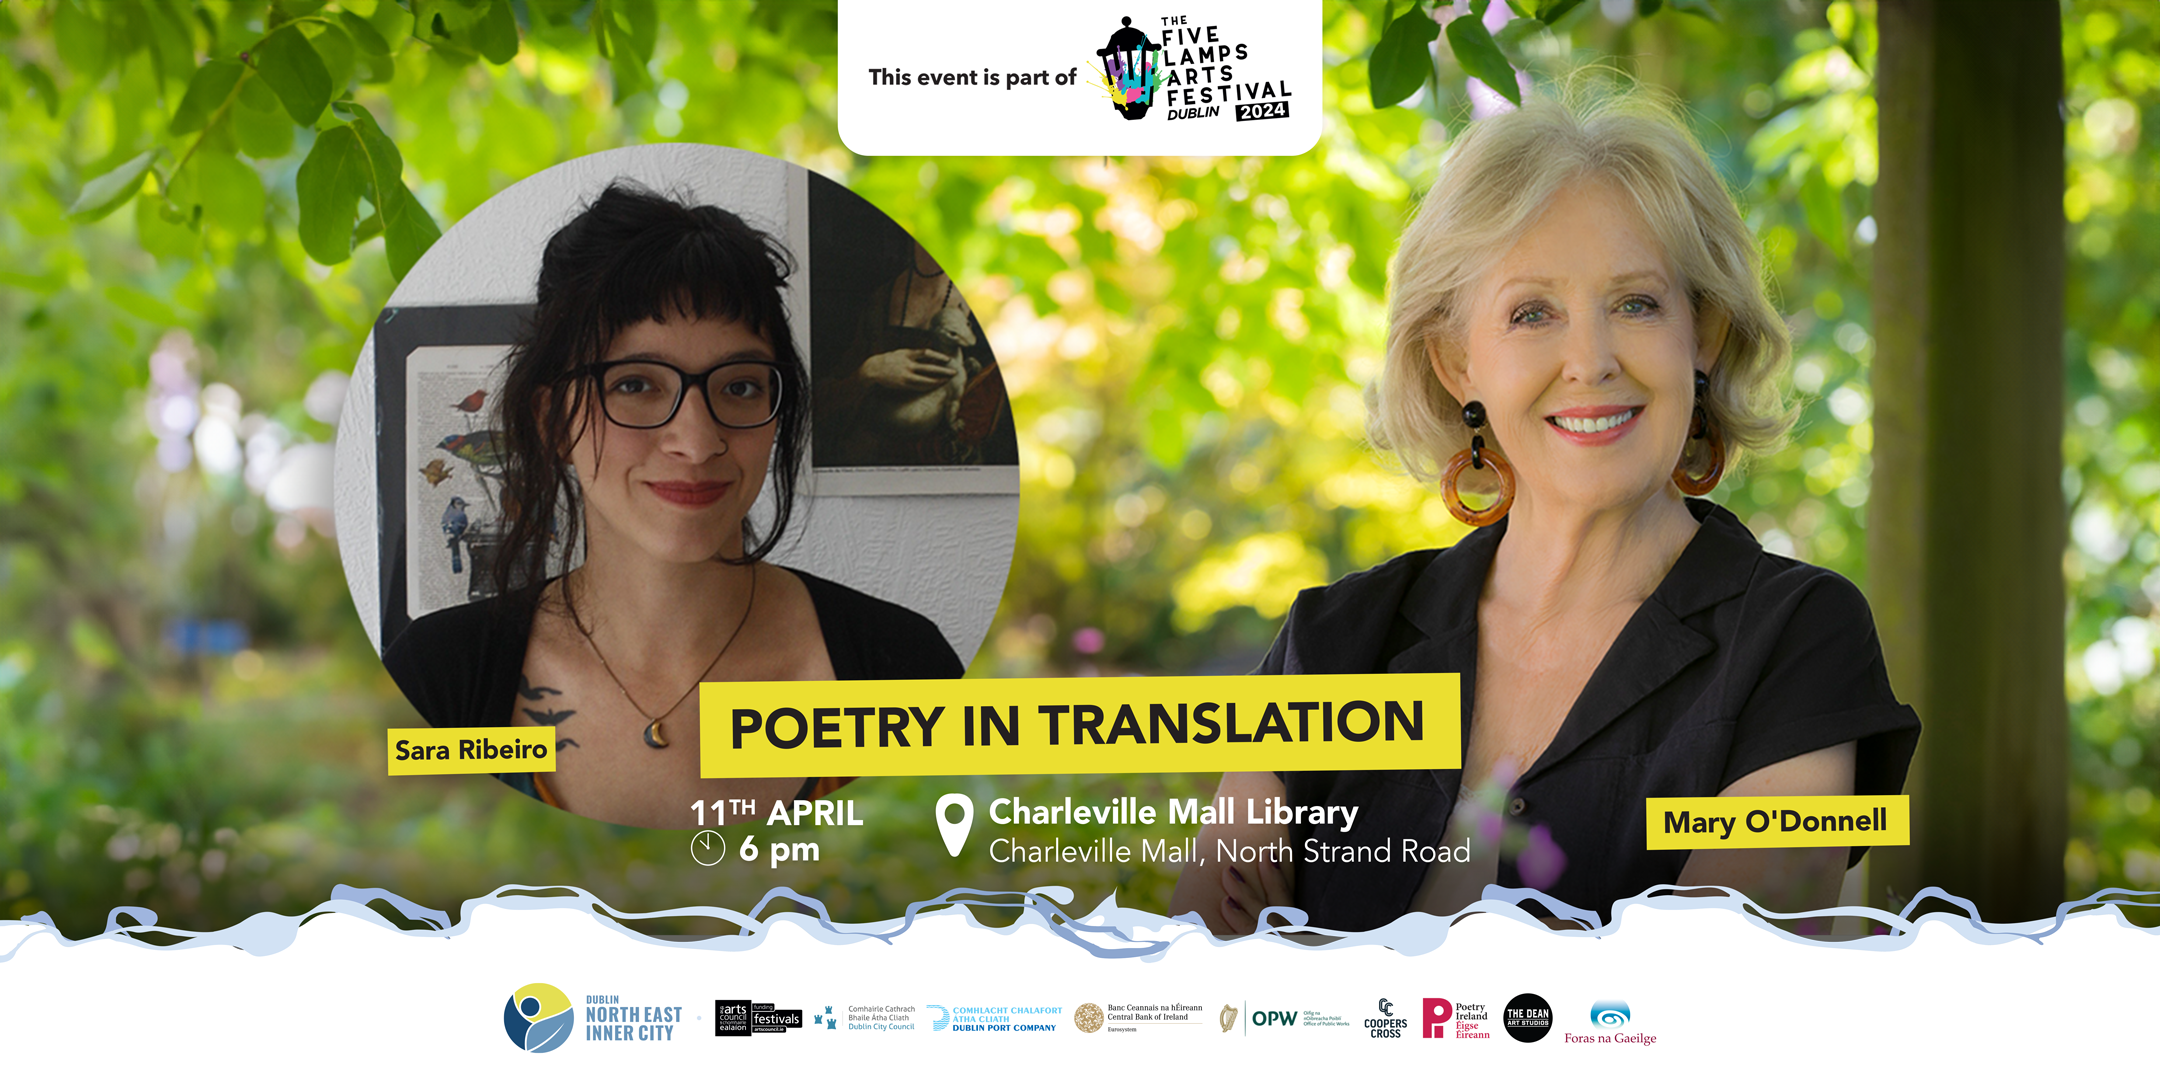 FLAF24 Poetry in Translation with Mary O'Donnell